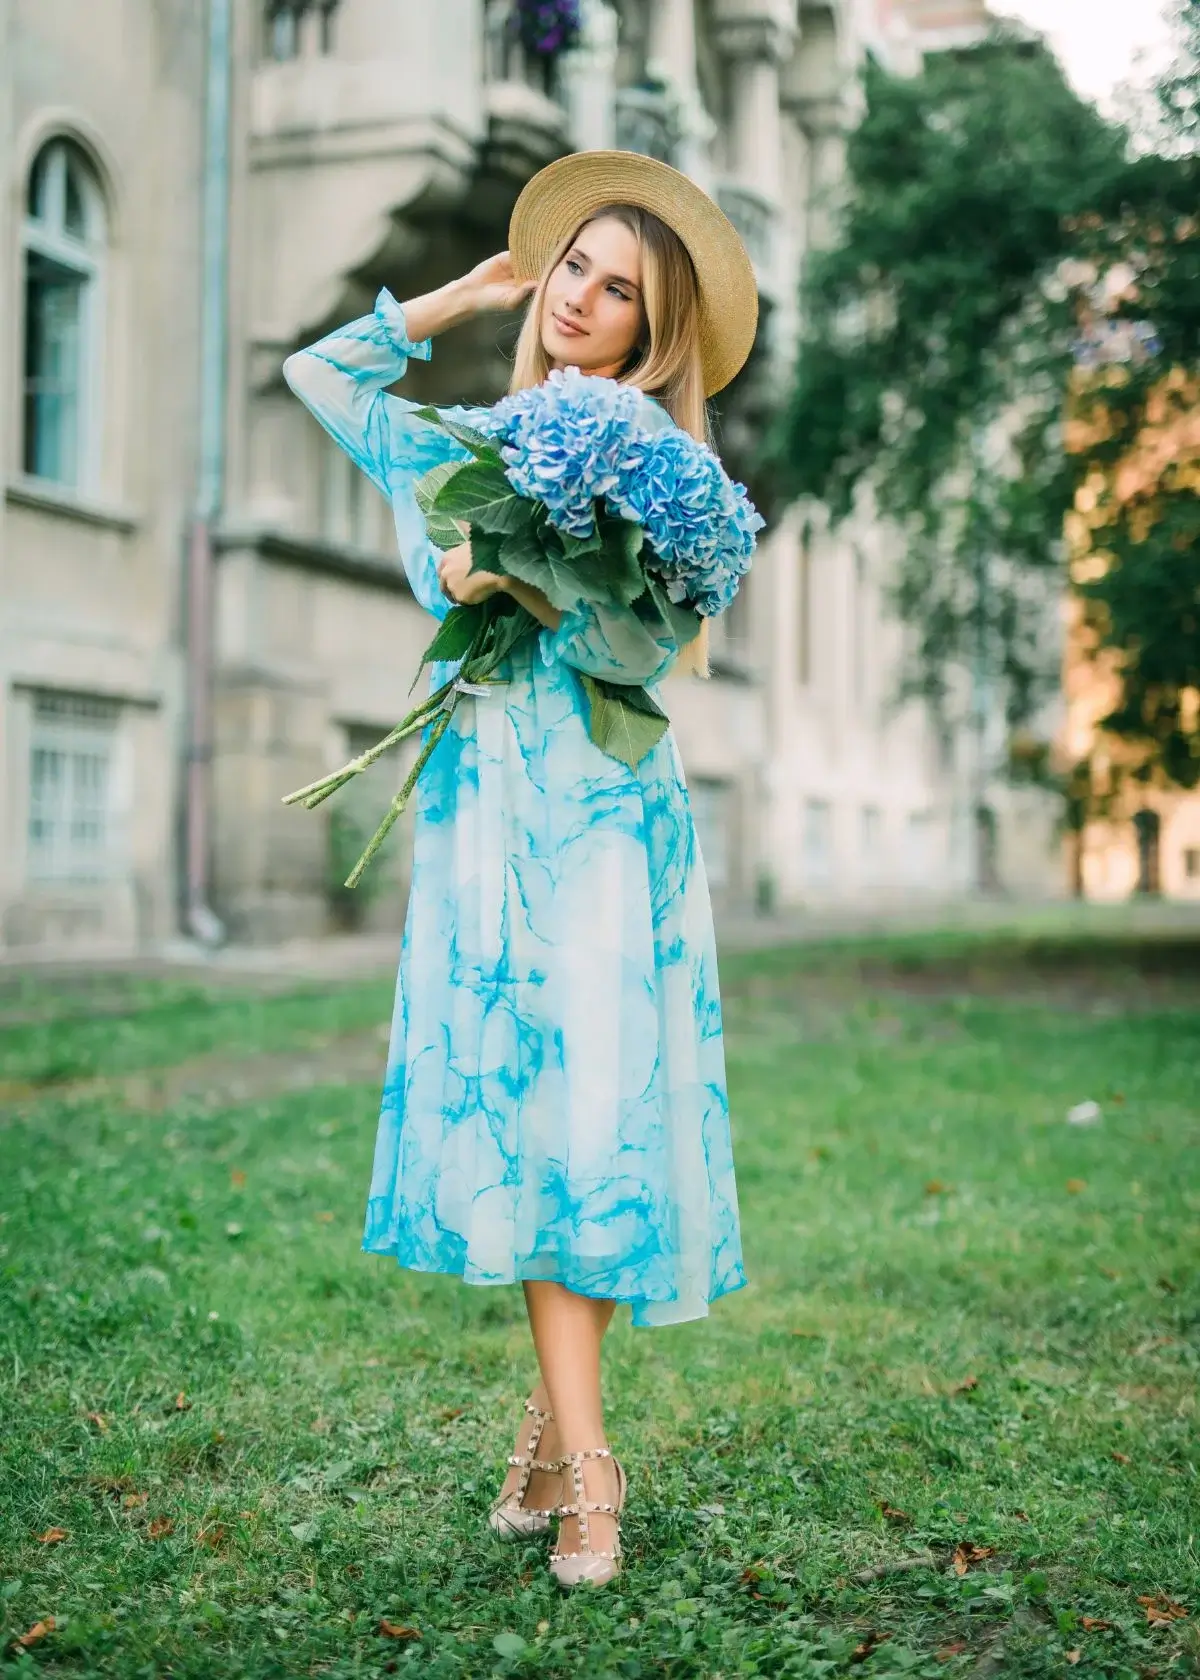 How to choose the right summer wedding guest dress?